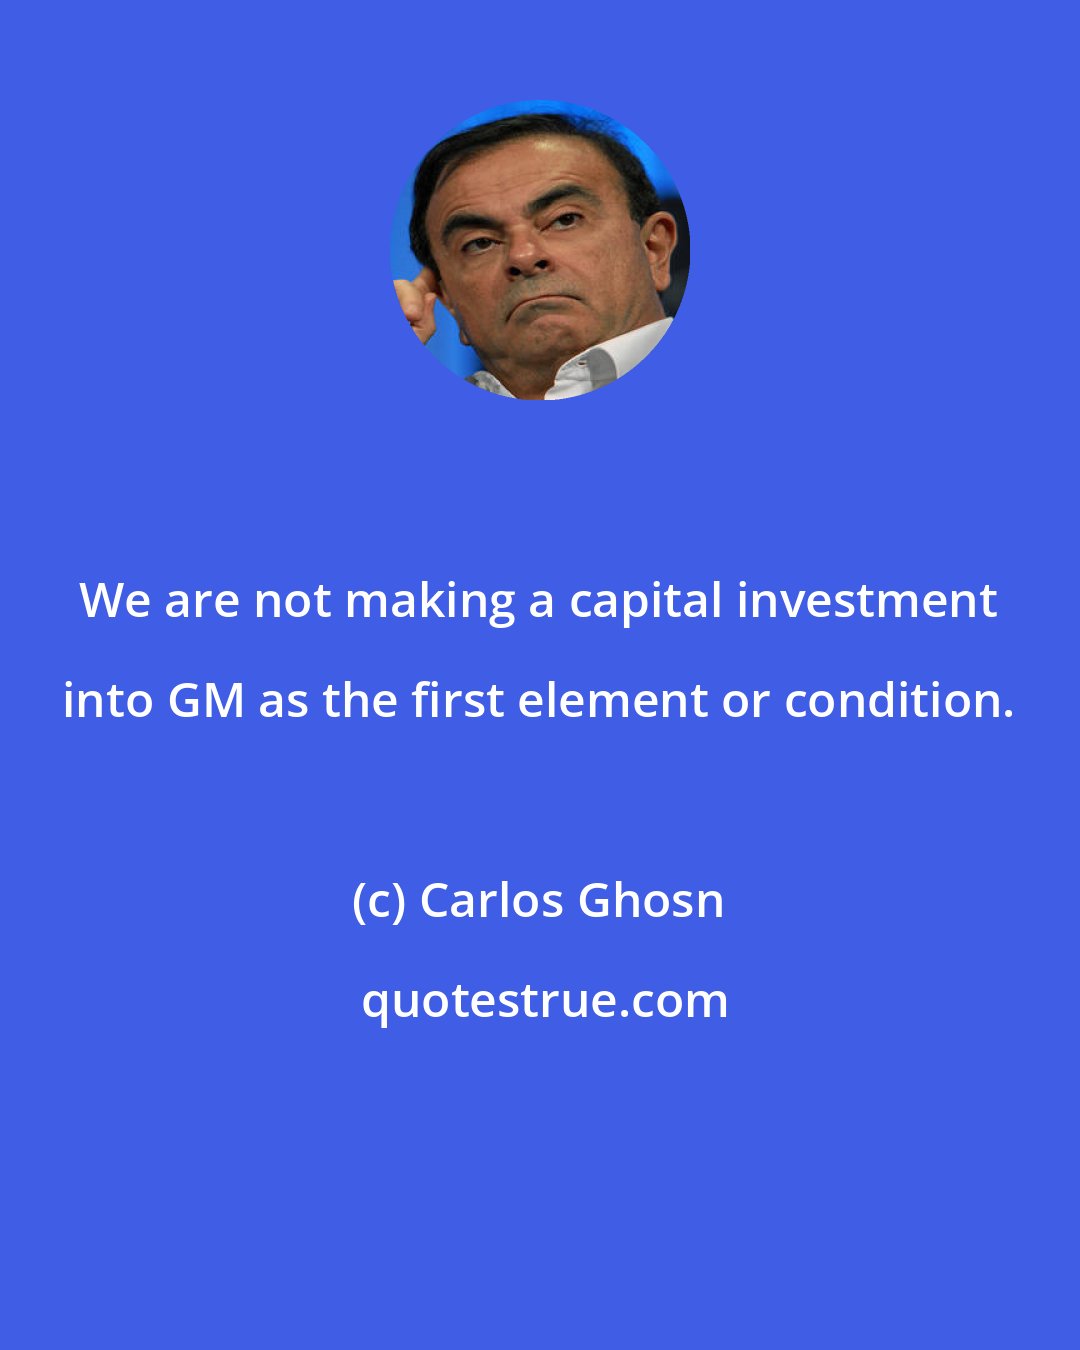 Carlos Ghosn: We are not making a capital investment into GM as the first element or condition.